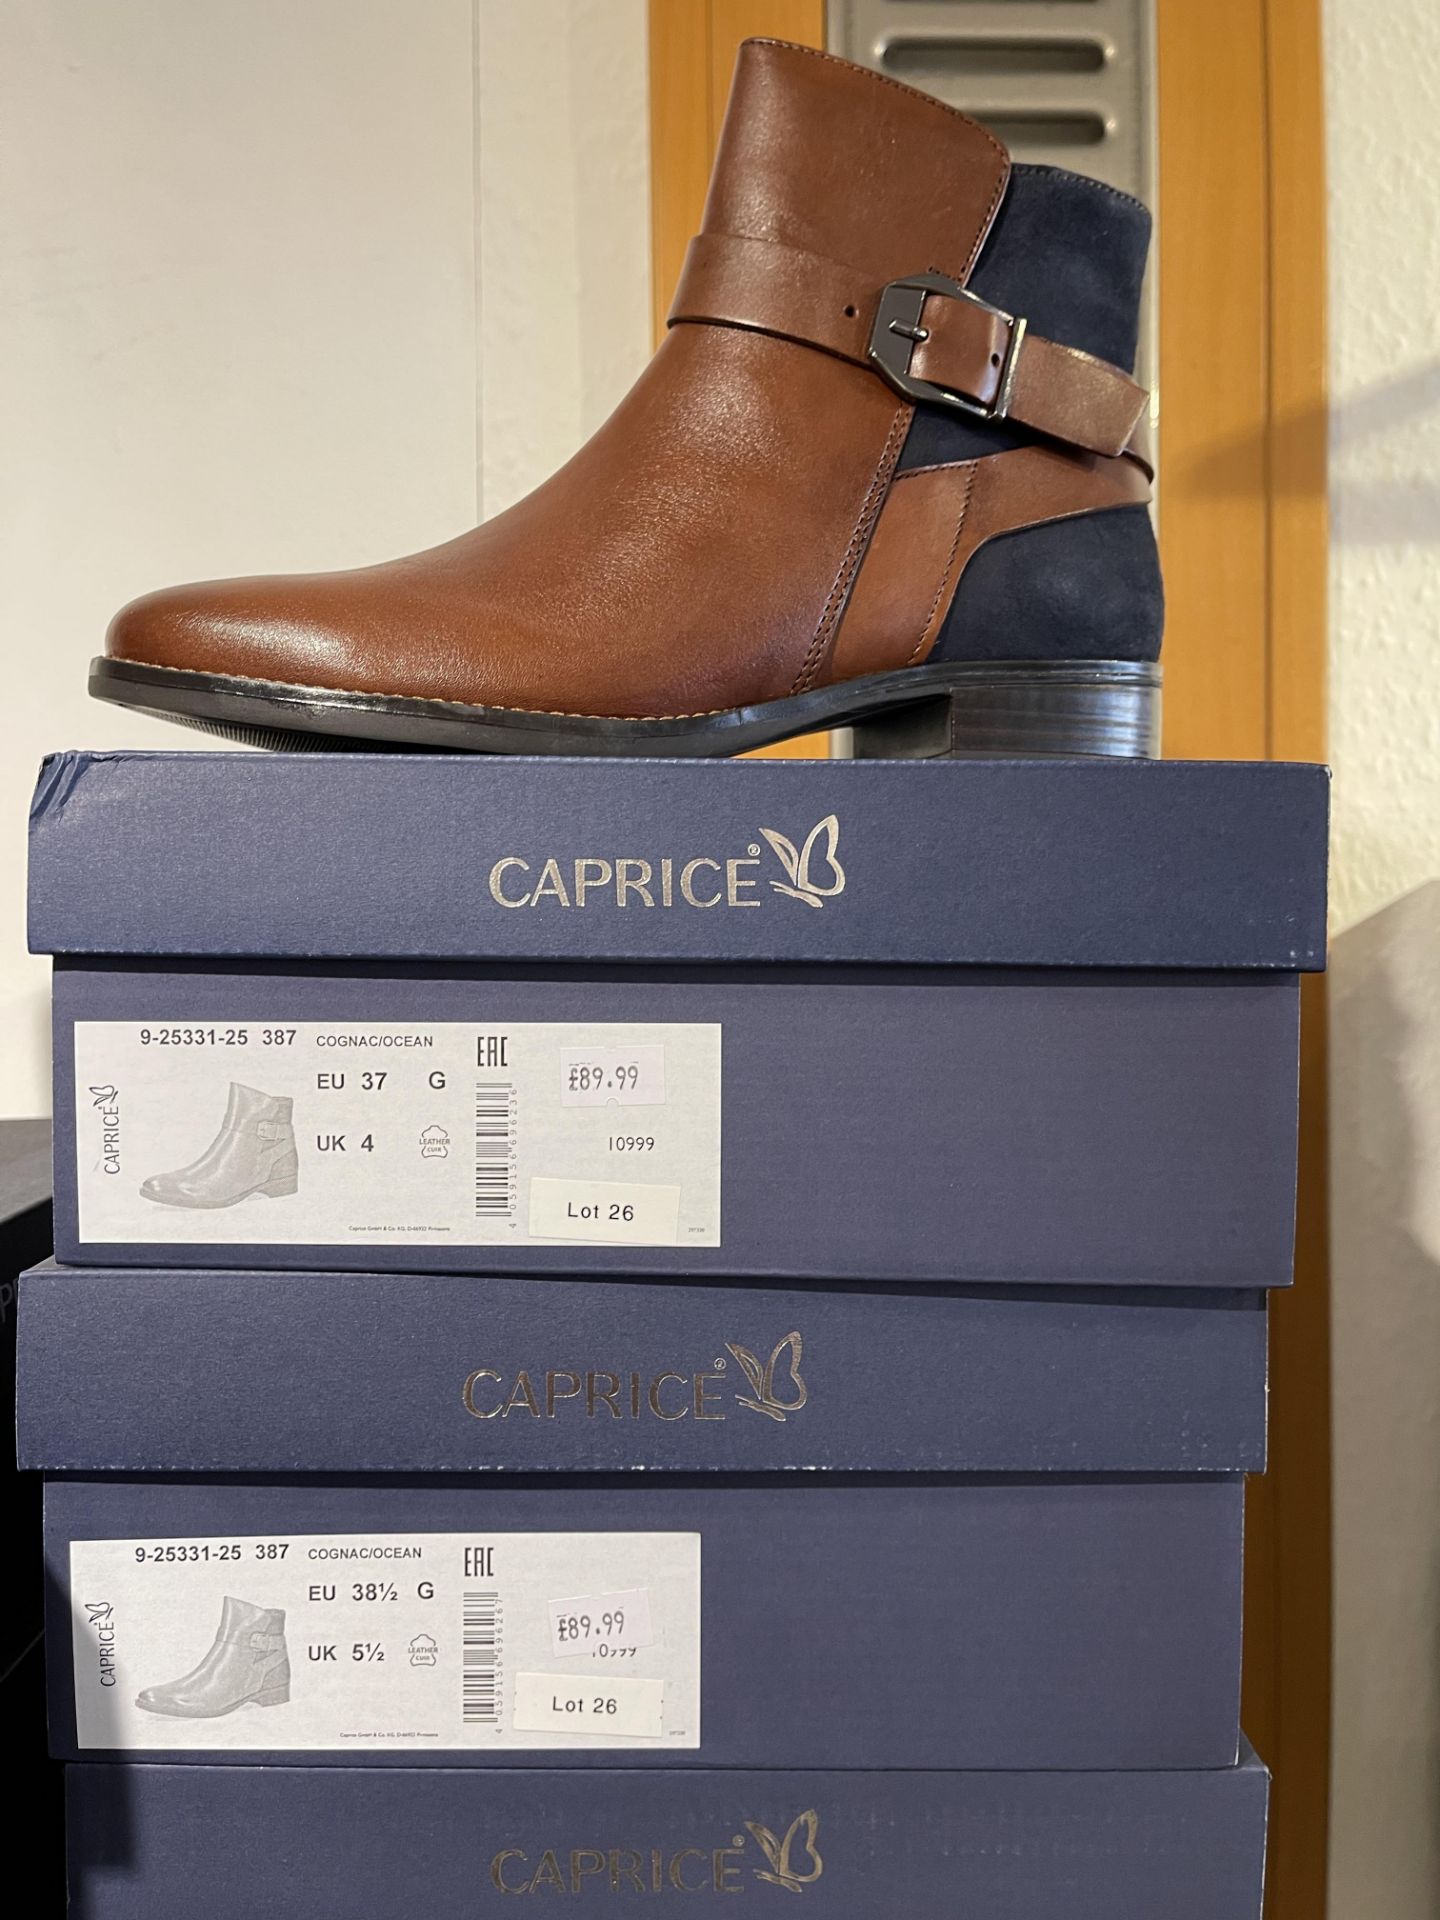 Caprice 5 Pairs: Cognac/Ocean Ankle Boots 9-25331-25 387. Sizes 5 - 6.5 (RRP £89.99) Caprice 5 - Image 7 of 14